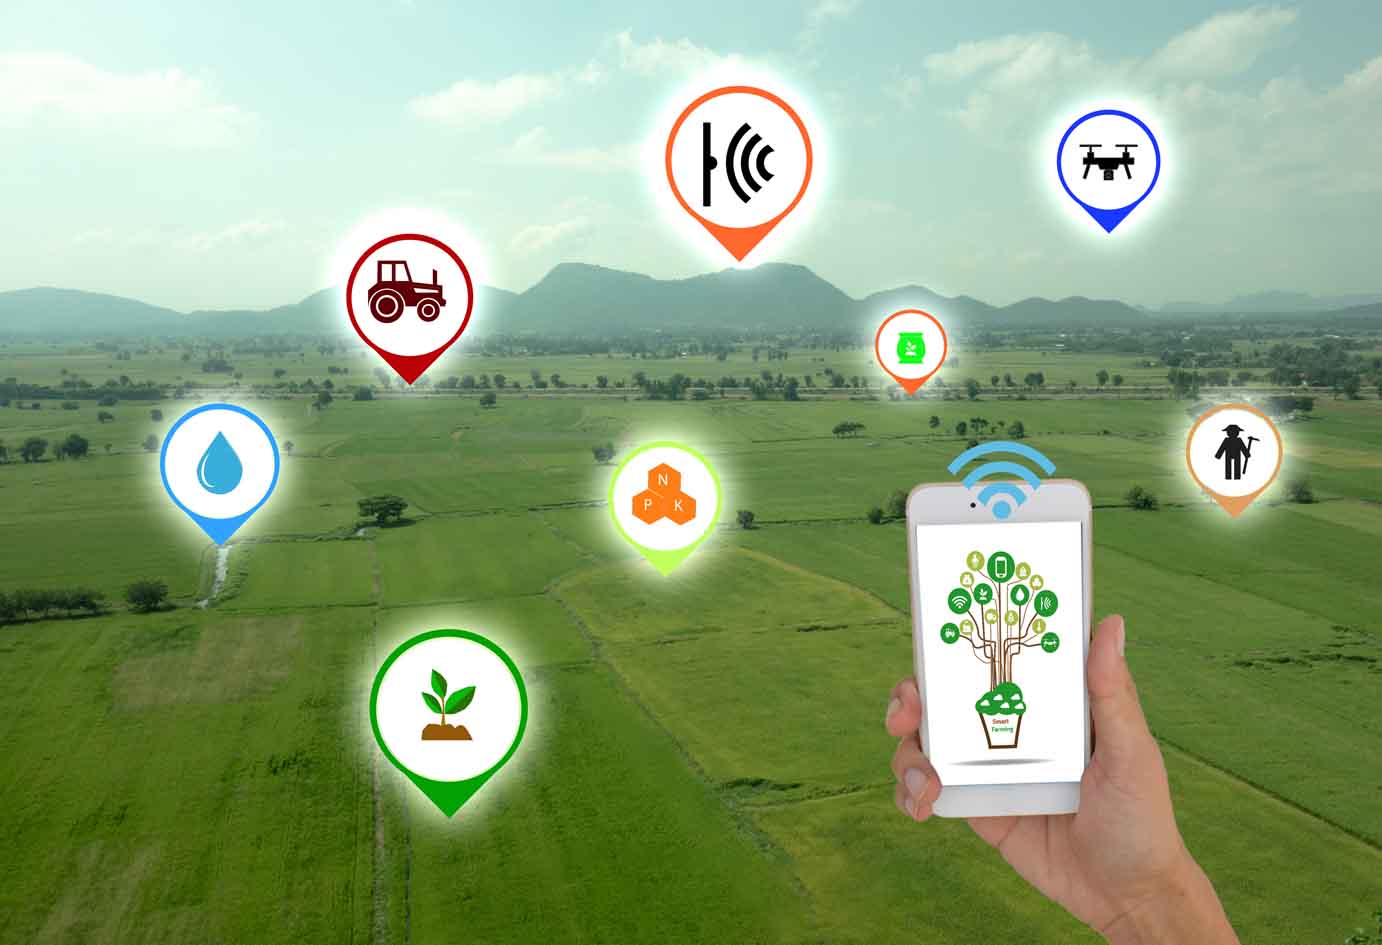 Smart farming. The farmer using application in phone to control and monitor conditions in the field